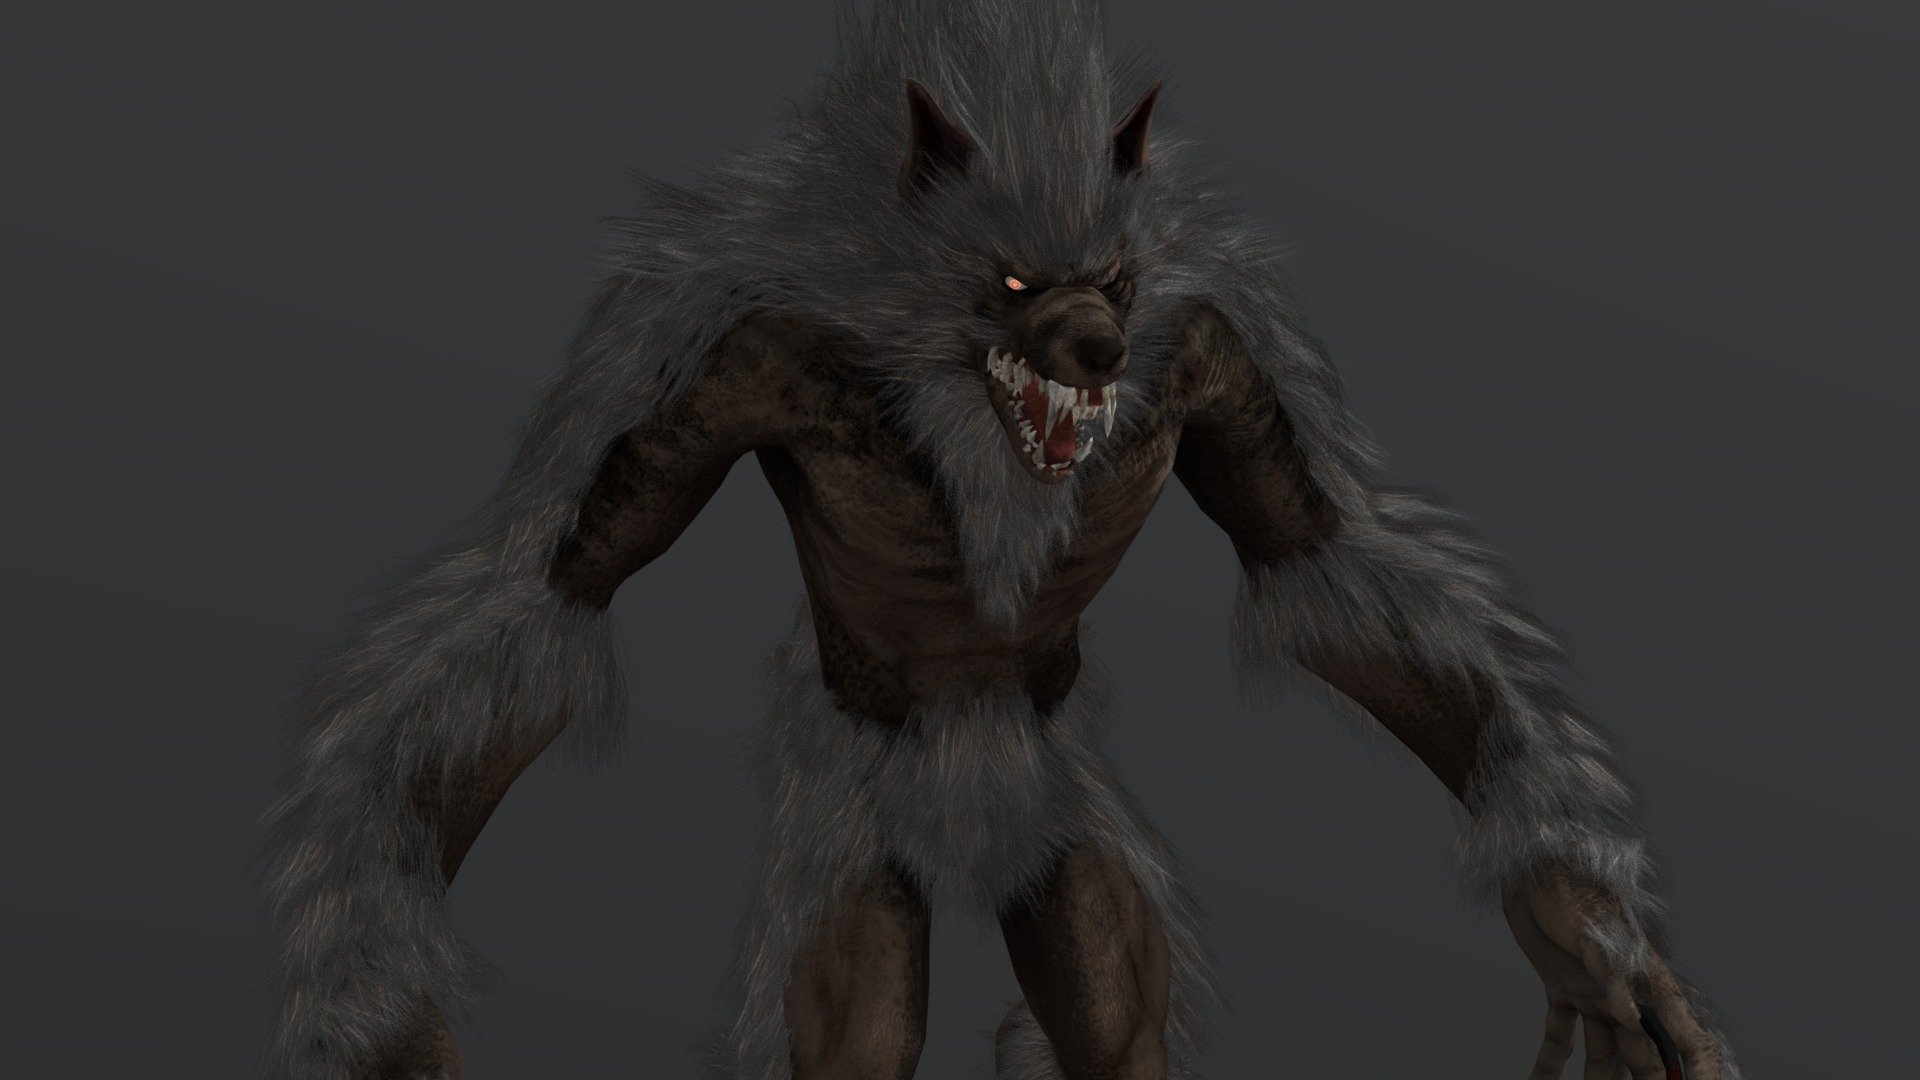 Low-poly model of the character Werewolf
Suitable for games of different genre: RPG, strategy, first-person shooter, etc.
In the archive, the basic mesh (fbx and maya)

Textures pack two map 4096x4096 body and fur 2048

In the model it is desirable to use a shader with a two-sided display of polygons.

The model contains 23 animations
atack (x8)
walking
running (x3)
Straif LR (x2)
idle (x3)
death (x3)
get hit (x2)
jump

faces 15909
verts 30388
tris 30894 - Werewolf - Buy Royalty Free 3D model by dremorn 3d model